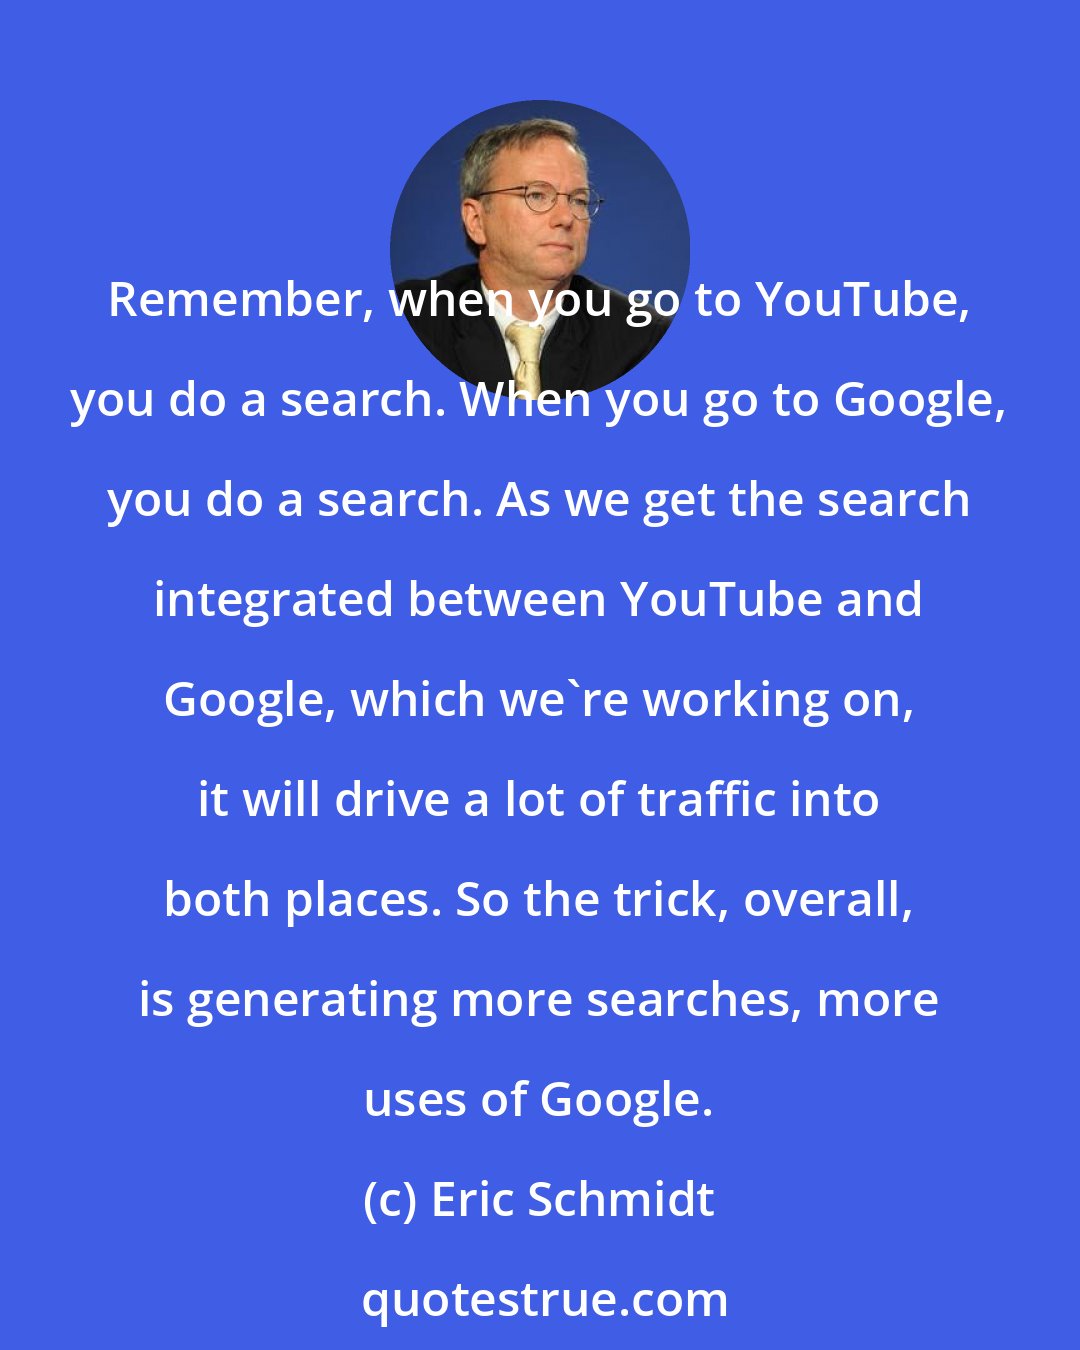 Eric Schmidt: Remember, when you go to YouTube, you do a search. When you go to Google, you do a search. As we get the search integrated between YouTube and Google, which we're working on, it will drive a lot of traffic into both places. So the trick, overall, is generating more searches, more uses of Google.